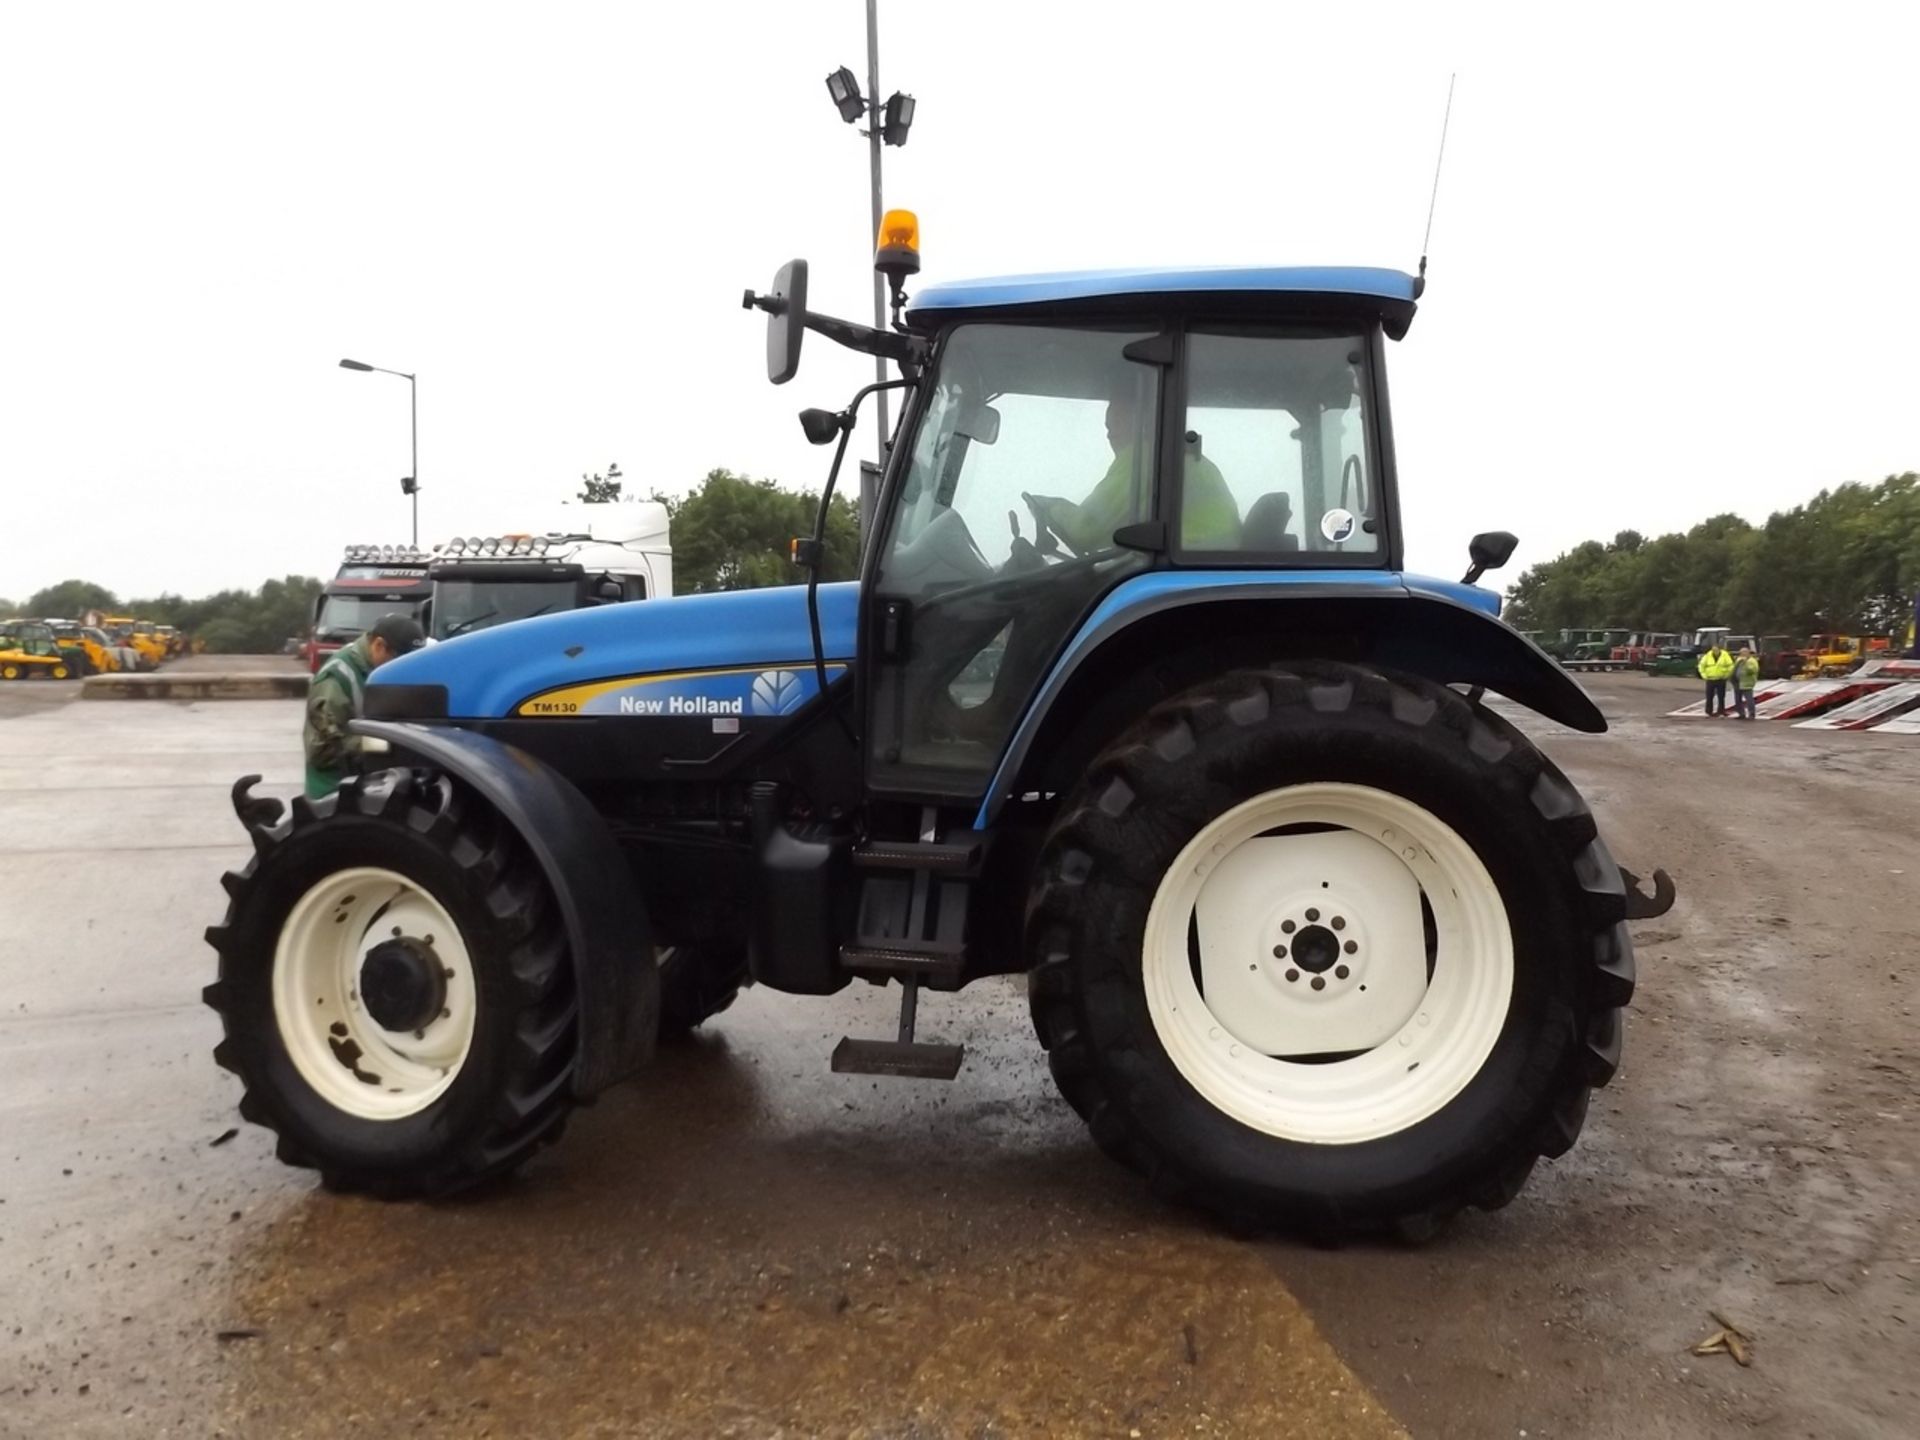 New Holland TM130 Range Command Tractor with Air Brakes. V5 will be supplied. Reg.No. MX57 GUE - Image 4 of 7